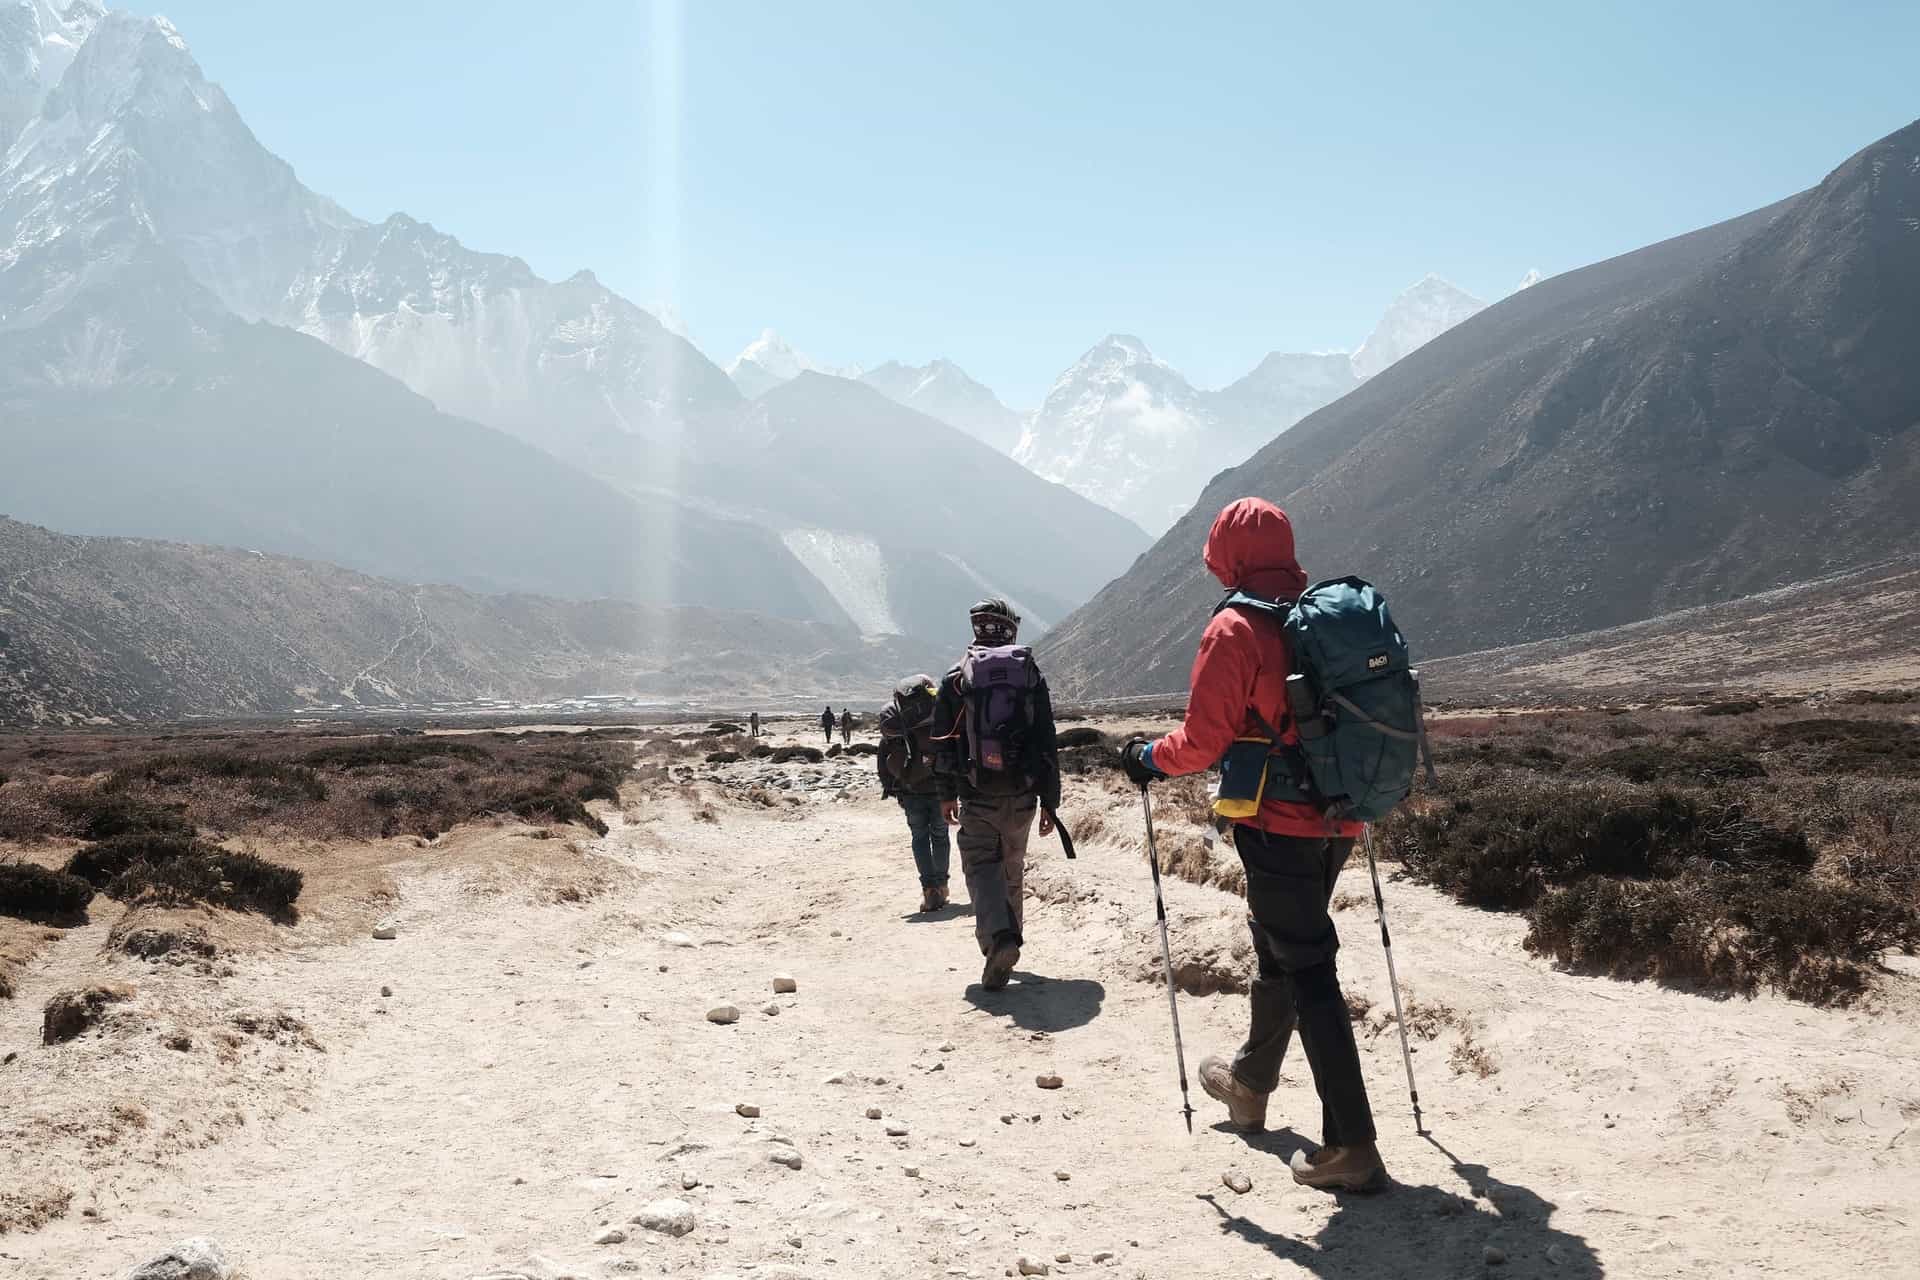 The Ultimate Guide to Trekking Equipment